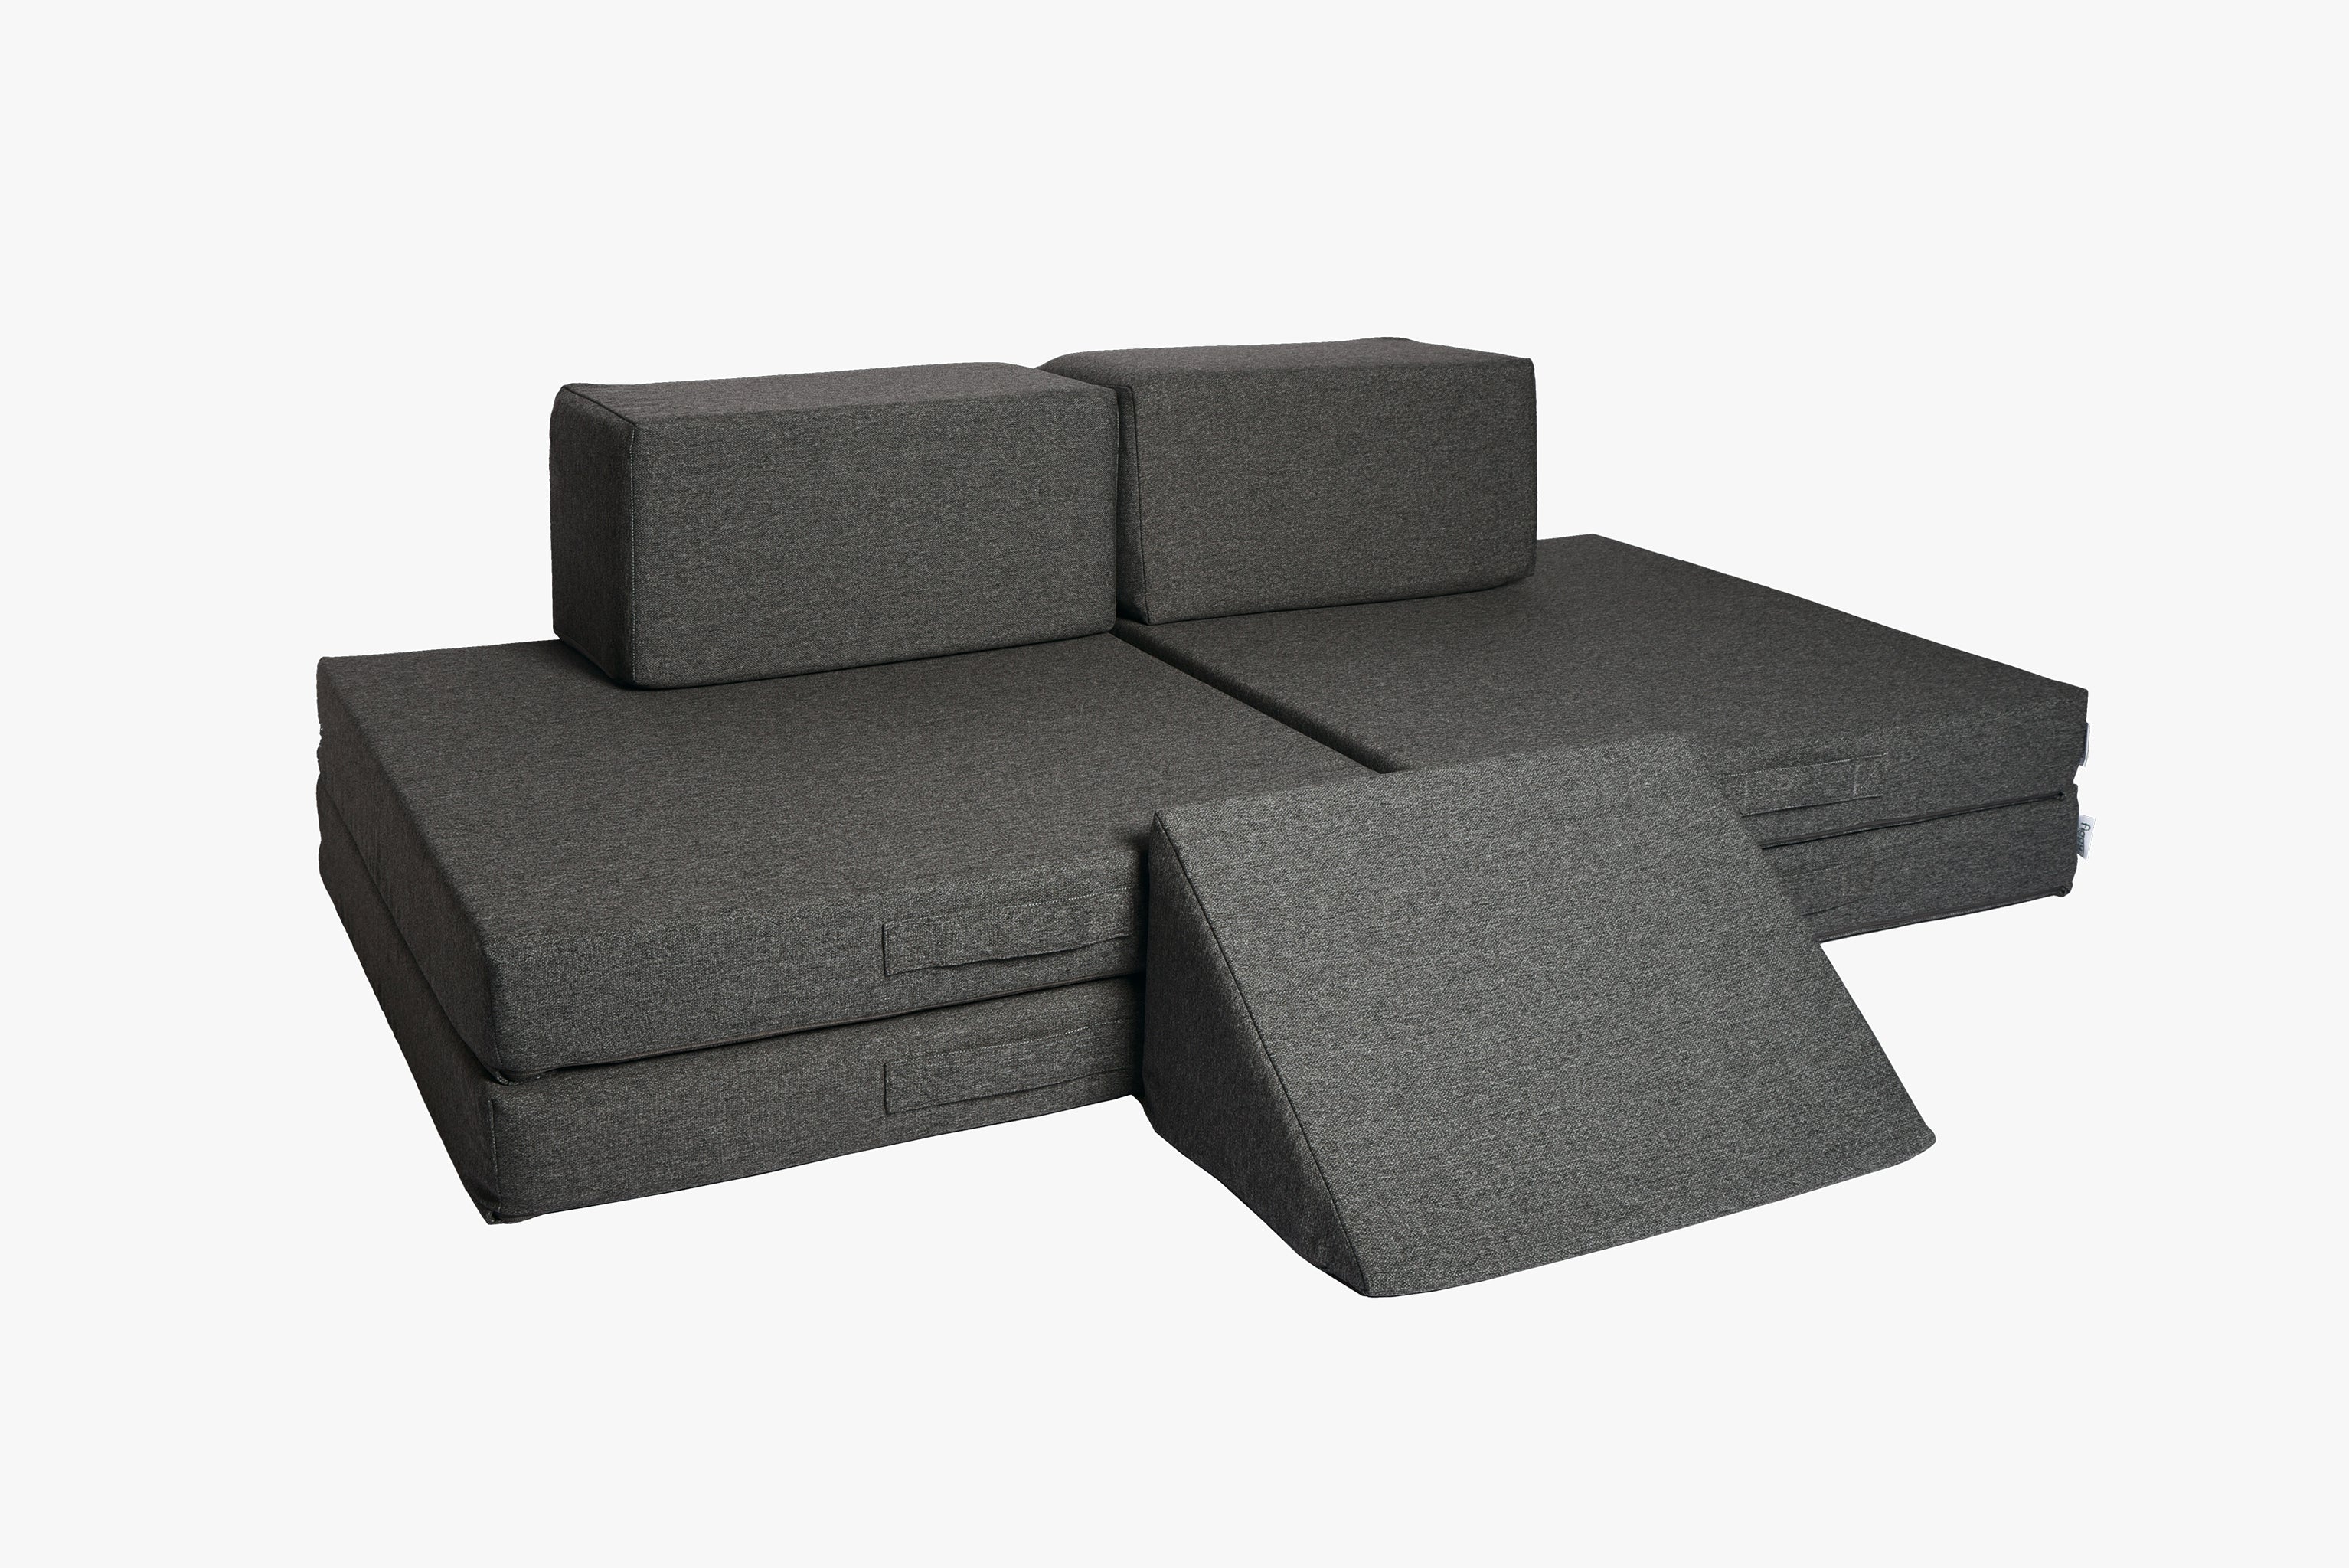 The Figgy Play Couch charcoal